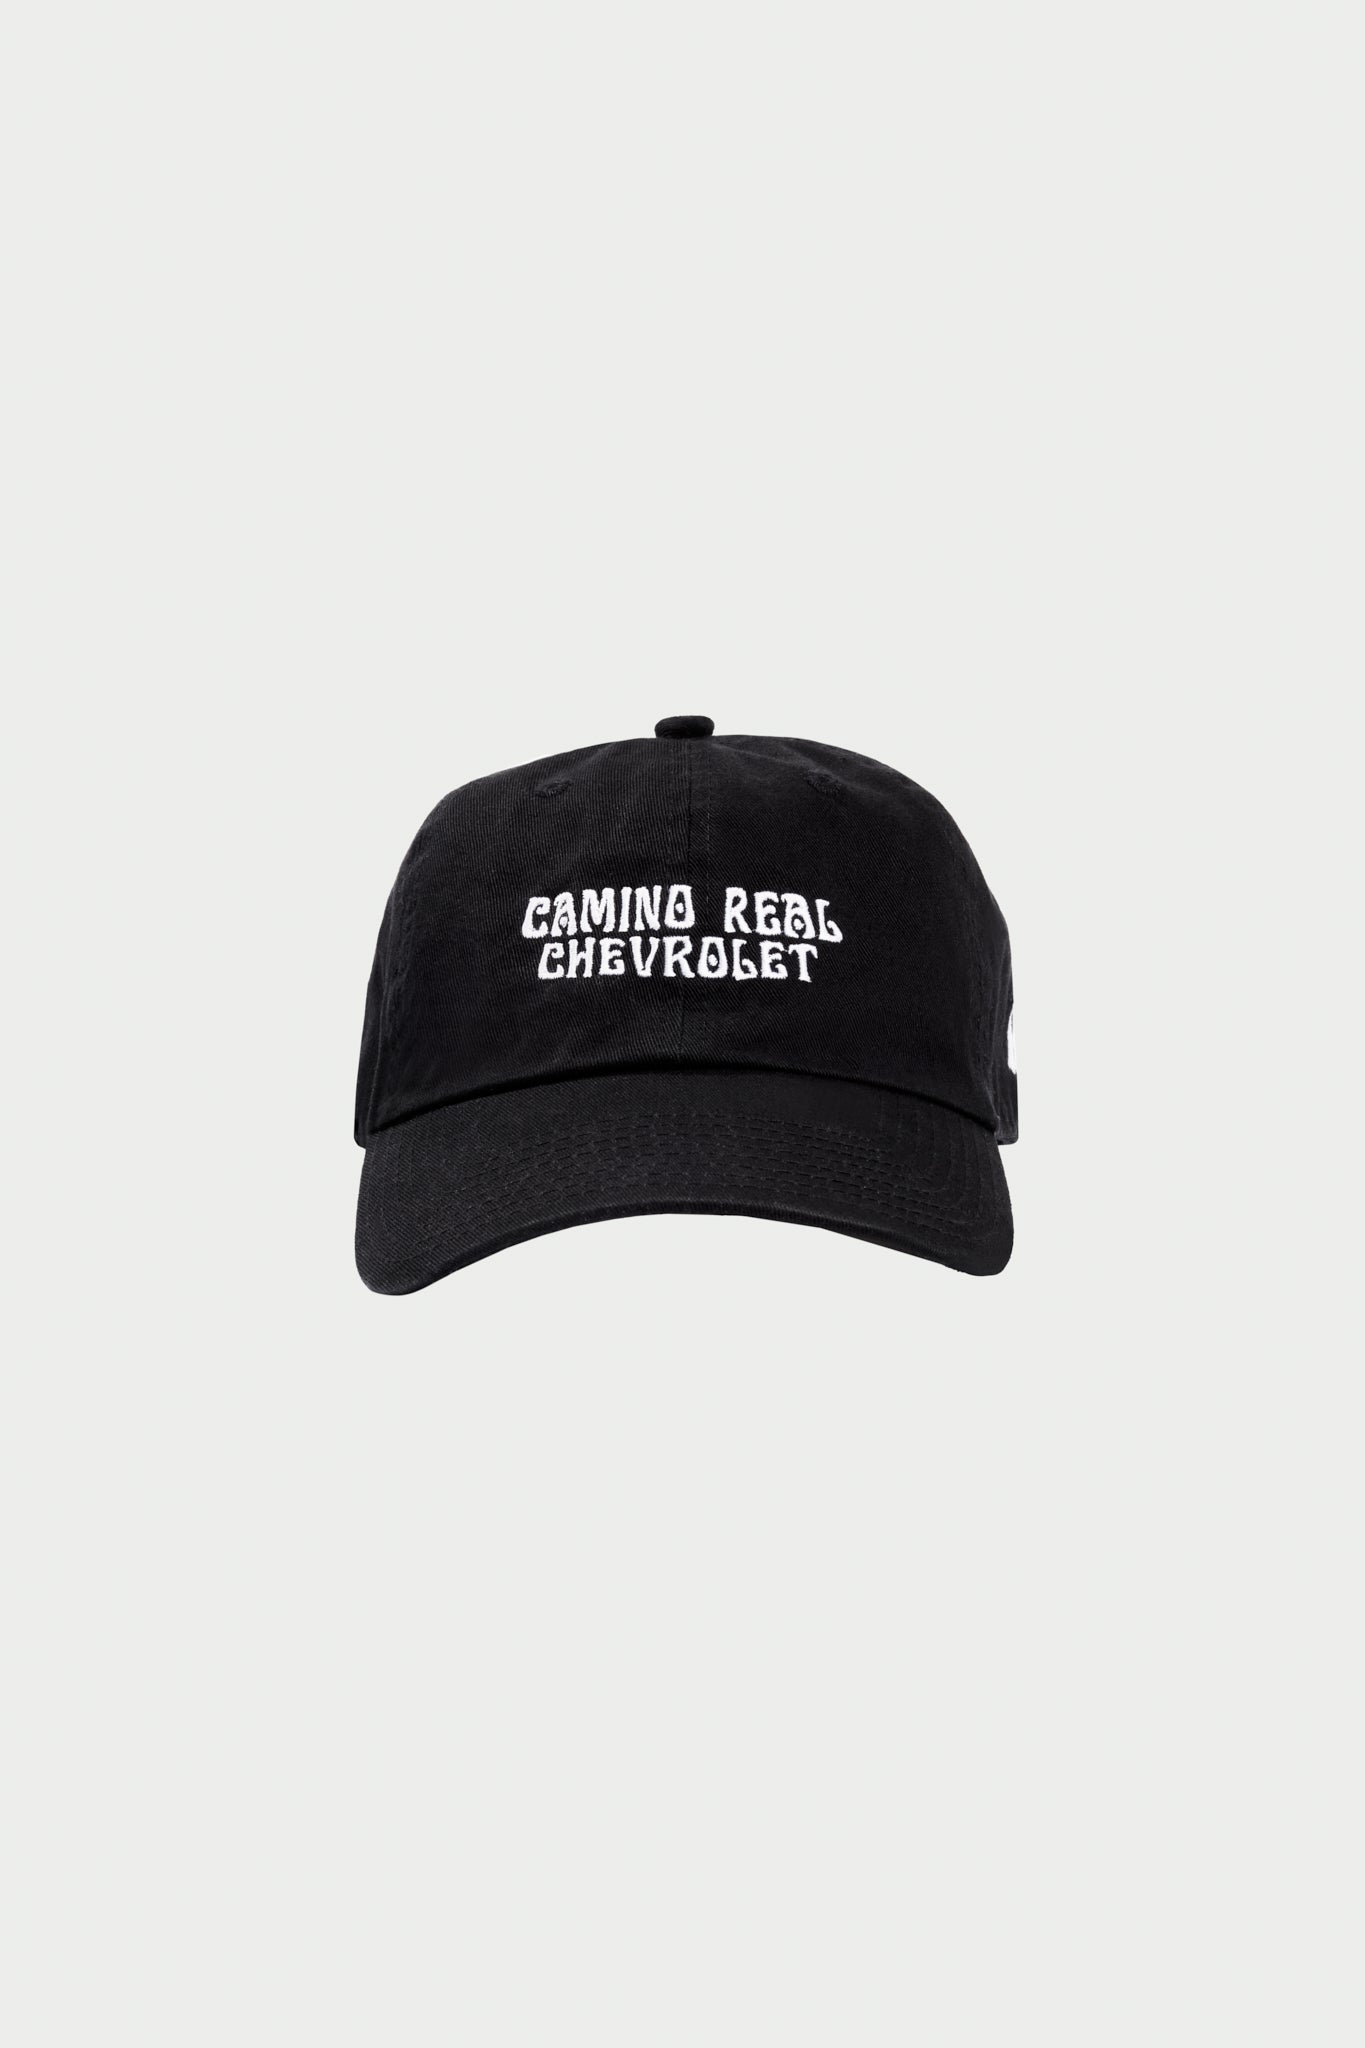 CLASSIC CAMINO REAL CHEVY DAD HAT (Black)